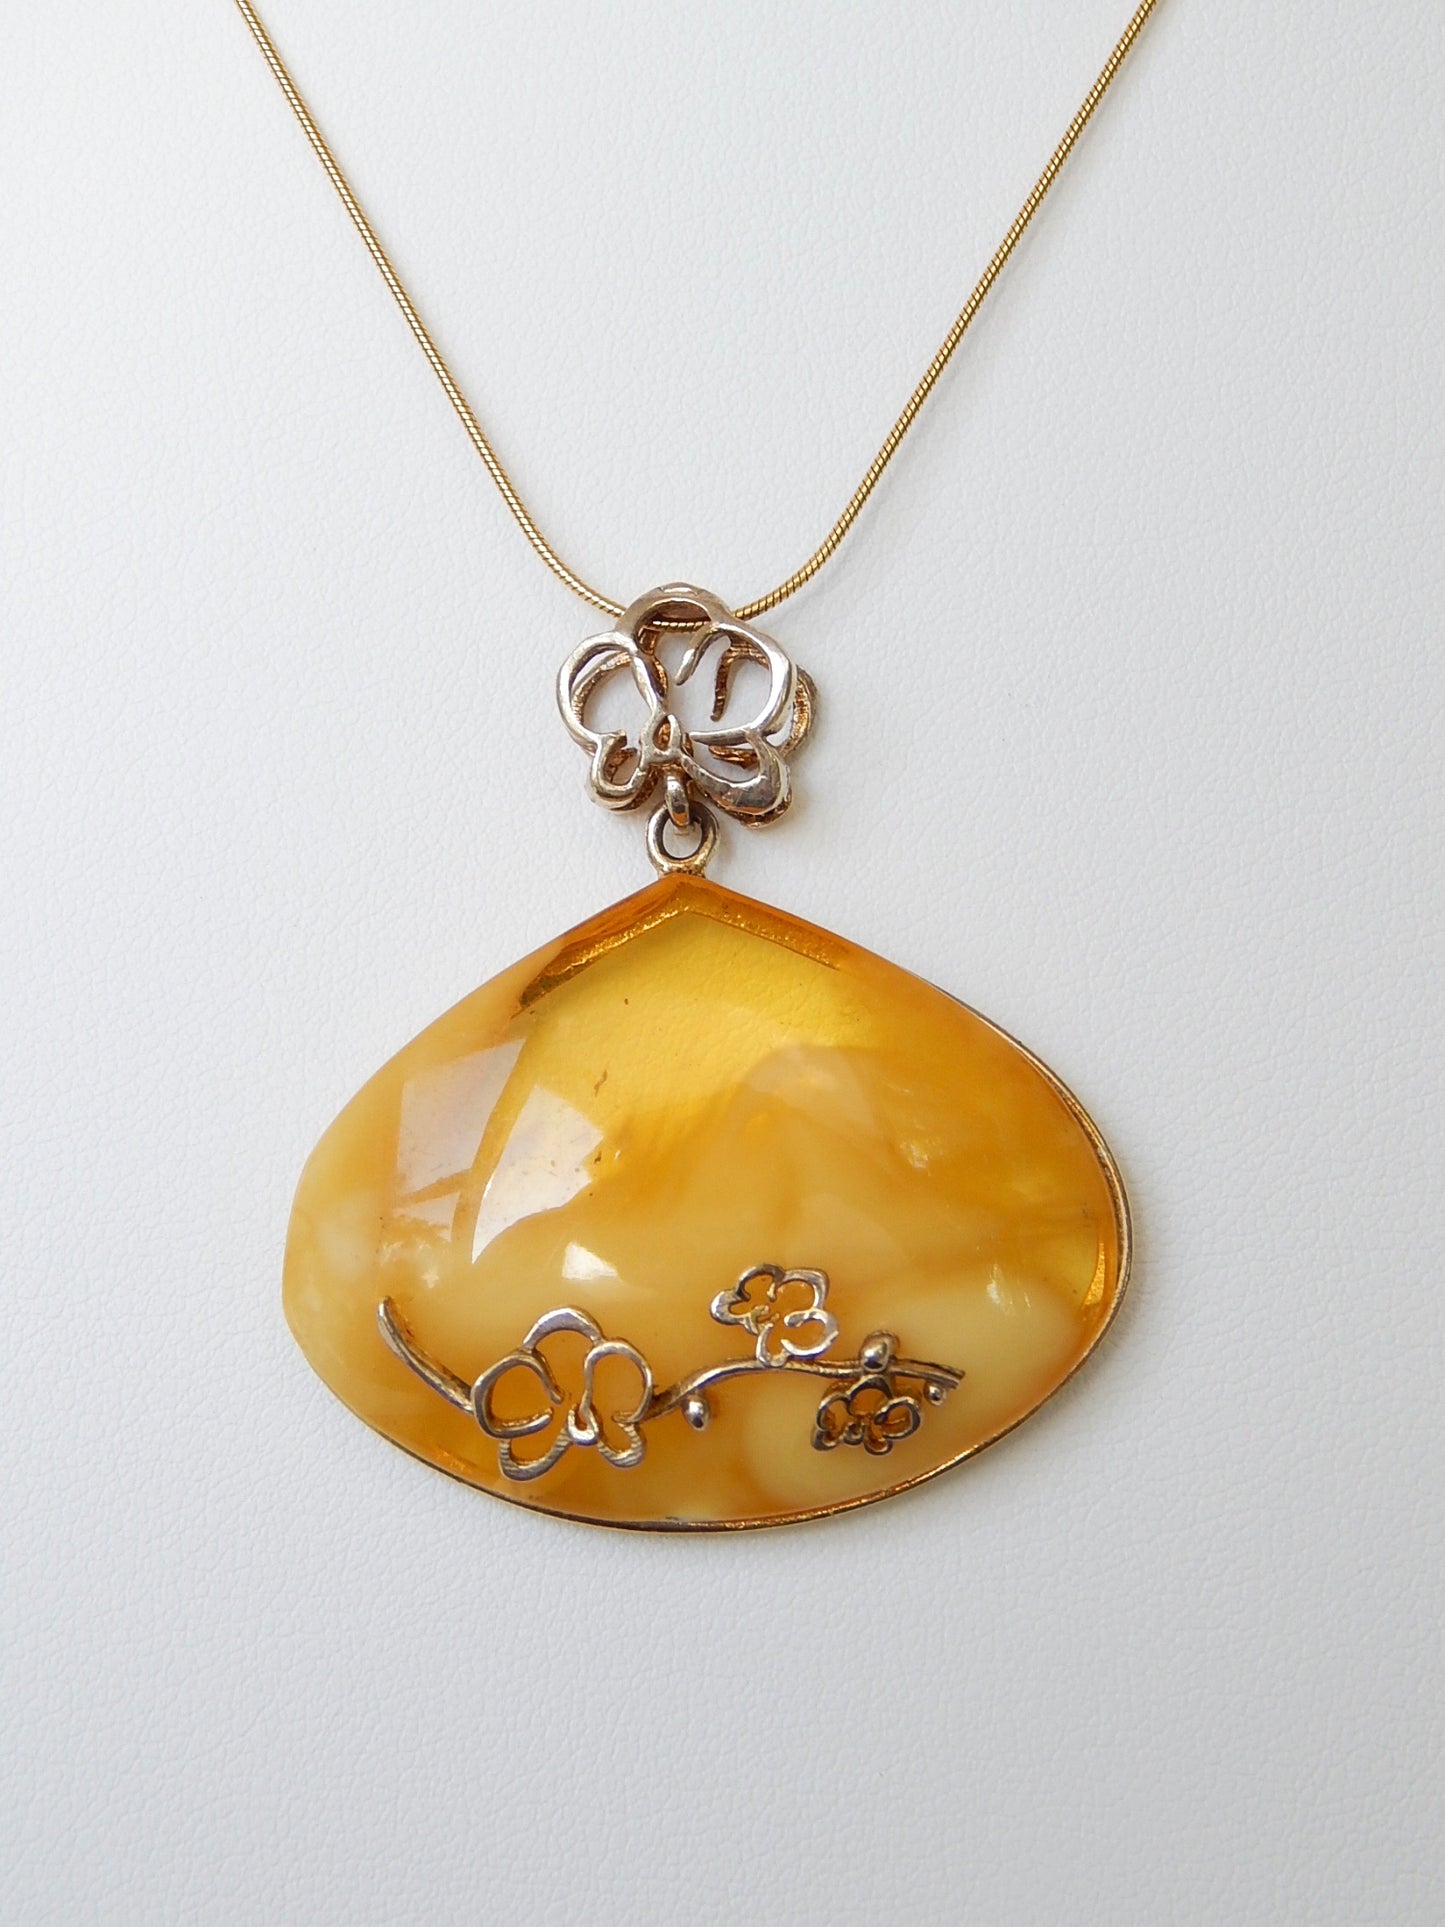 Handmade 14k Gold Plated Natural Baltic Lemon and White Amber Daisy Pendant Necklace